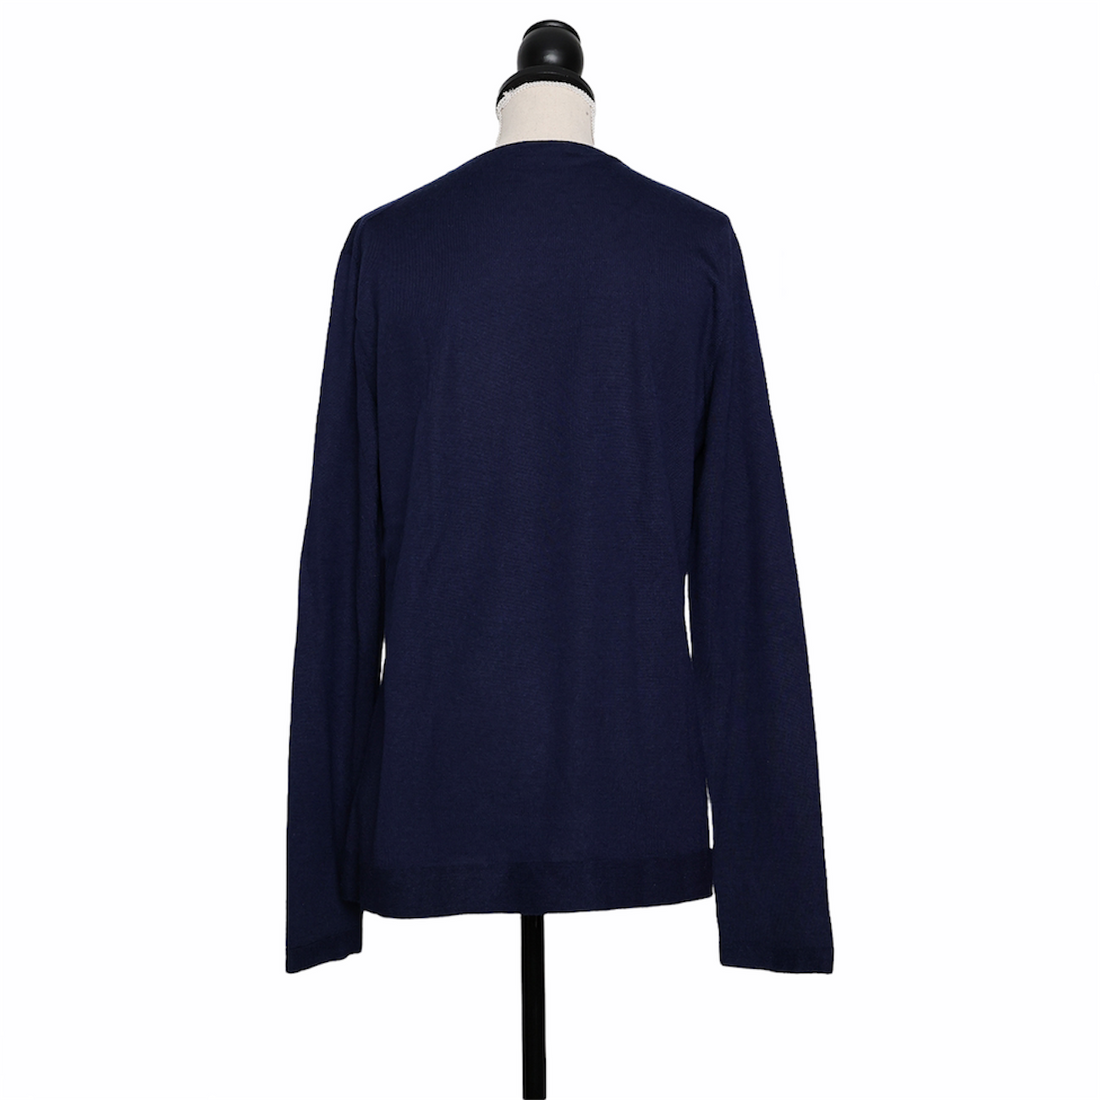 Akris cashmere and silk crew neck sweater with short sleeves - dark blue